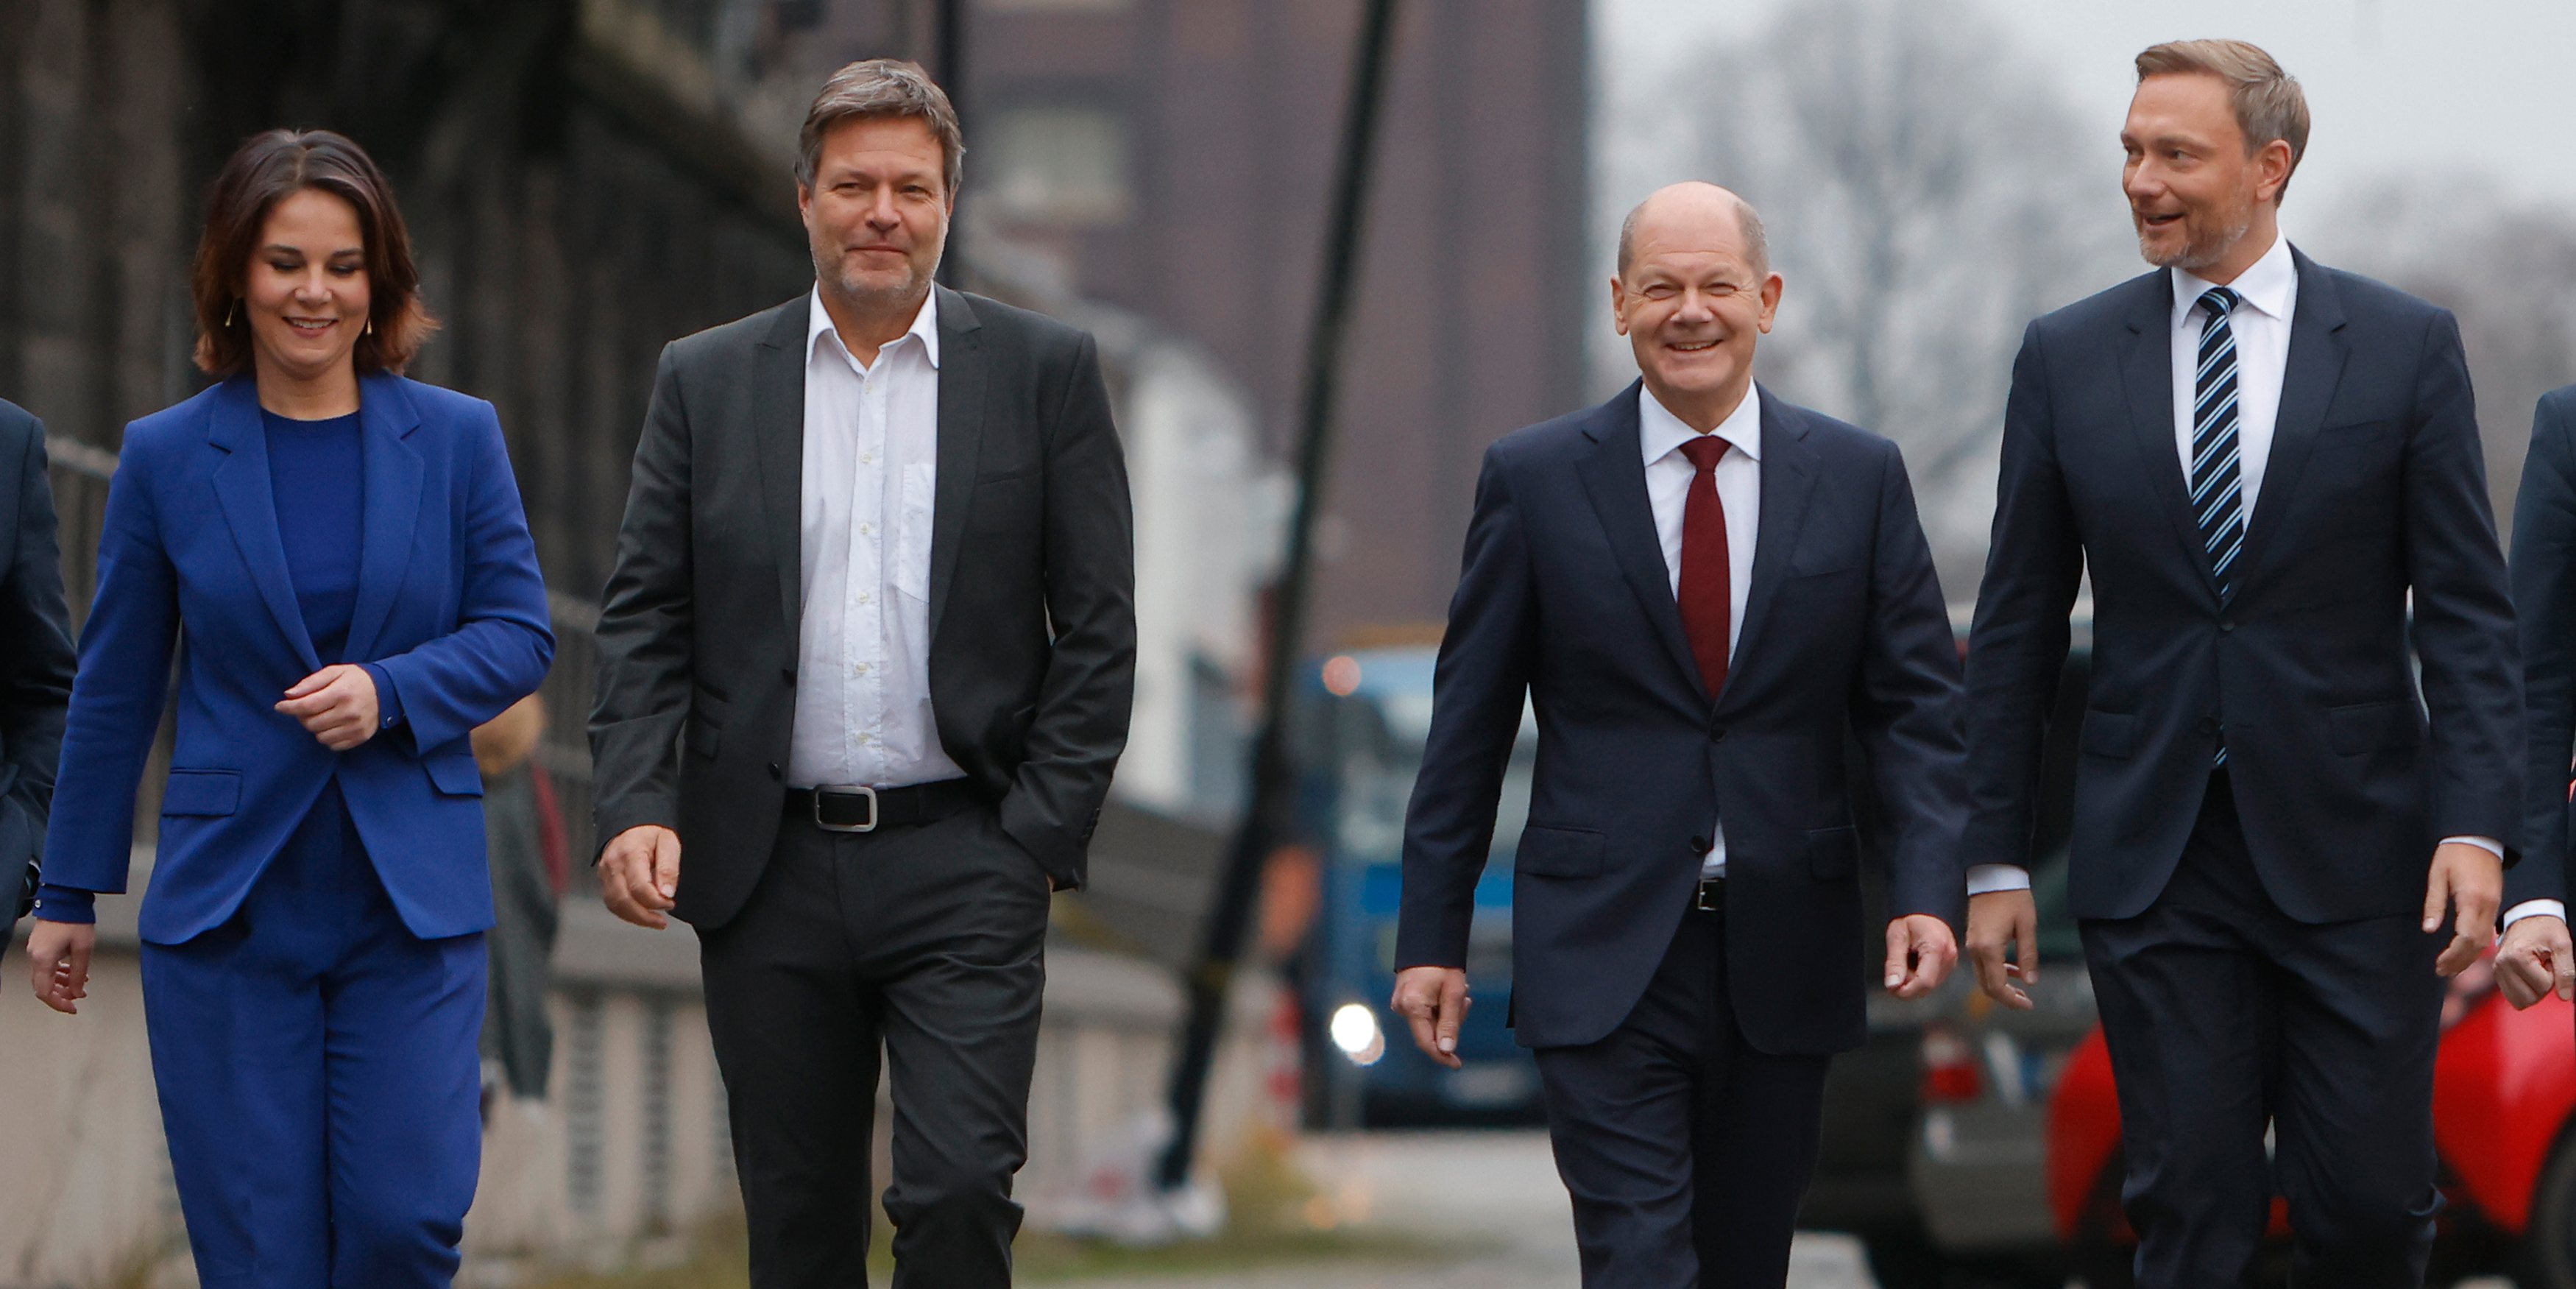 SPD, Greens And FDP Present Coalition Agreement, Pave Way For New Government